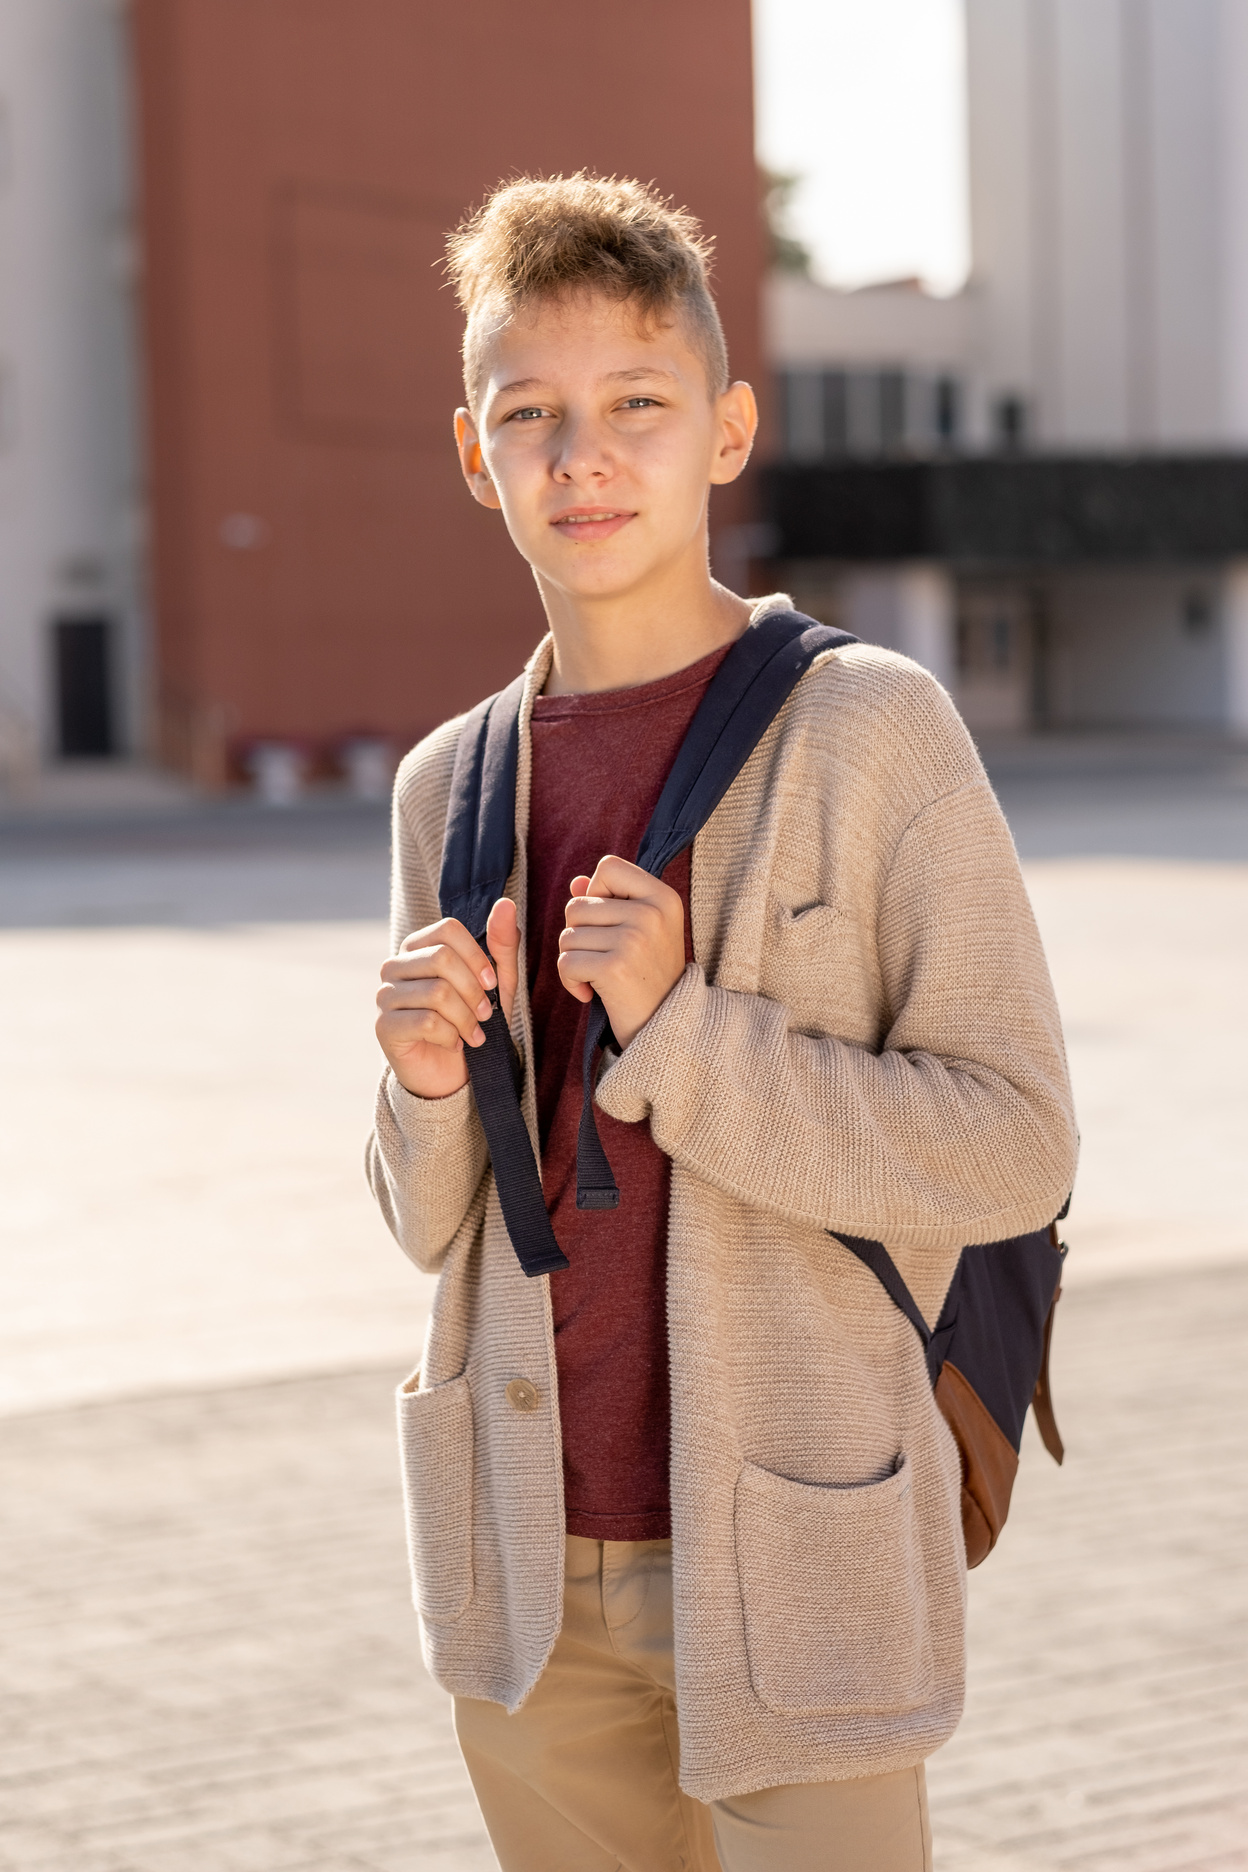 Secondary School Pupil in Casualwear Standing Outdoors